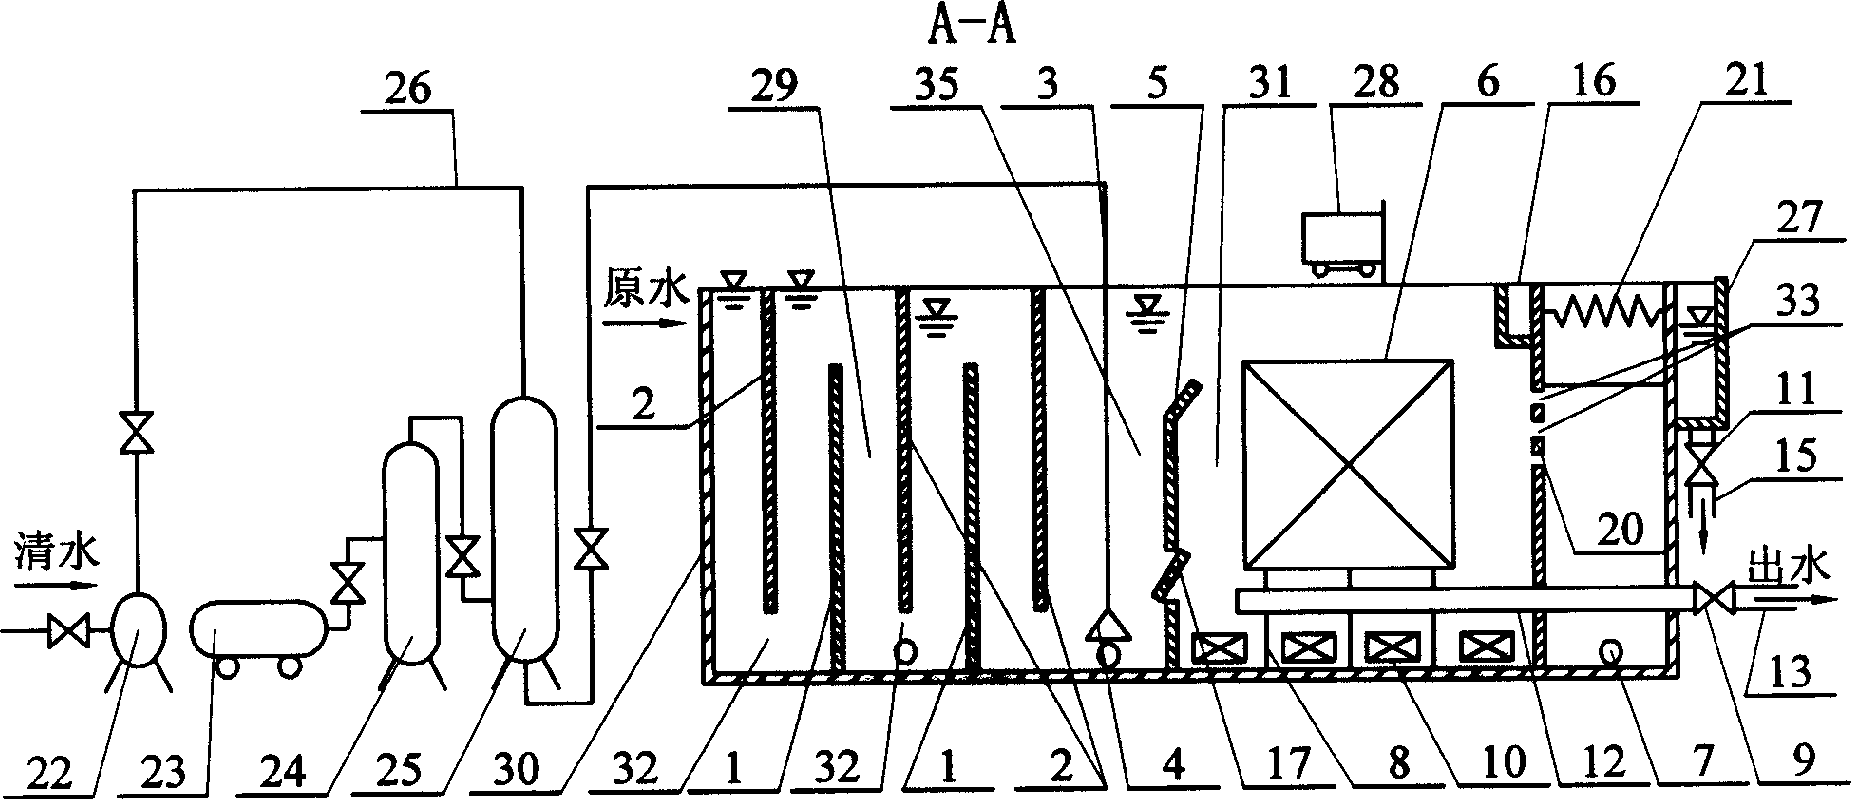 Gas float and deposition equipment for separating solid and liquid